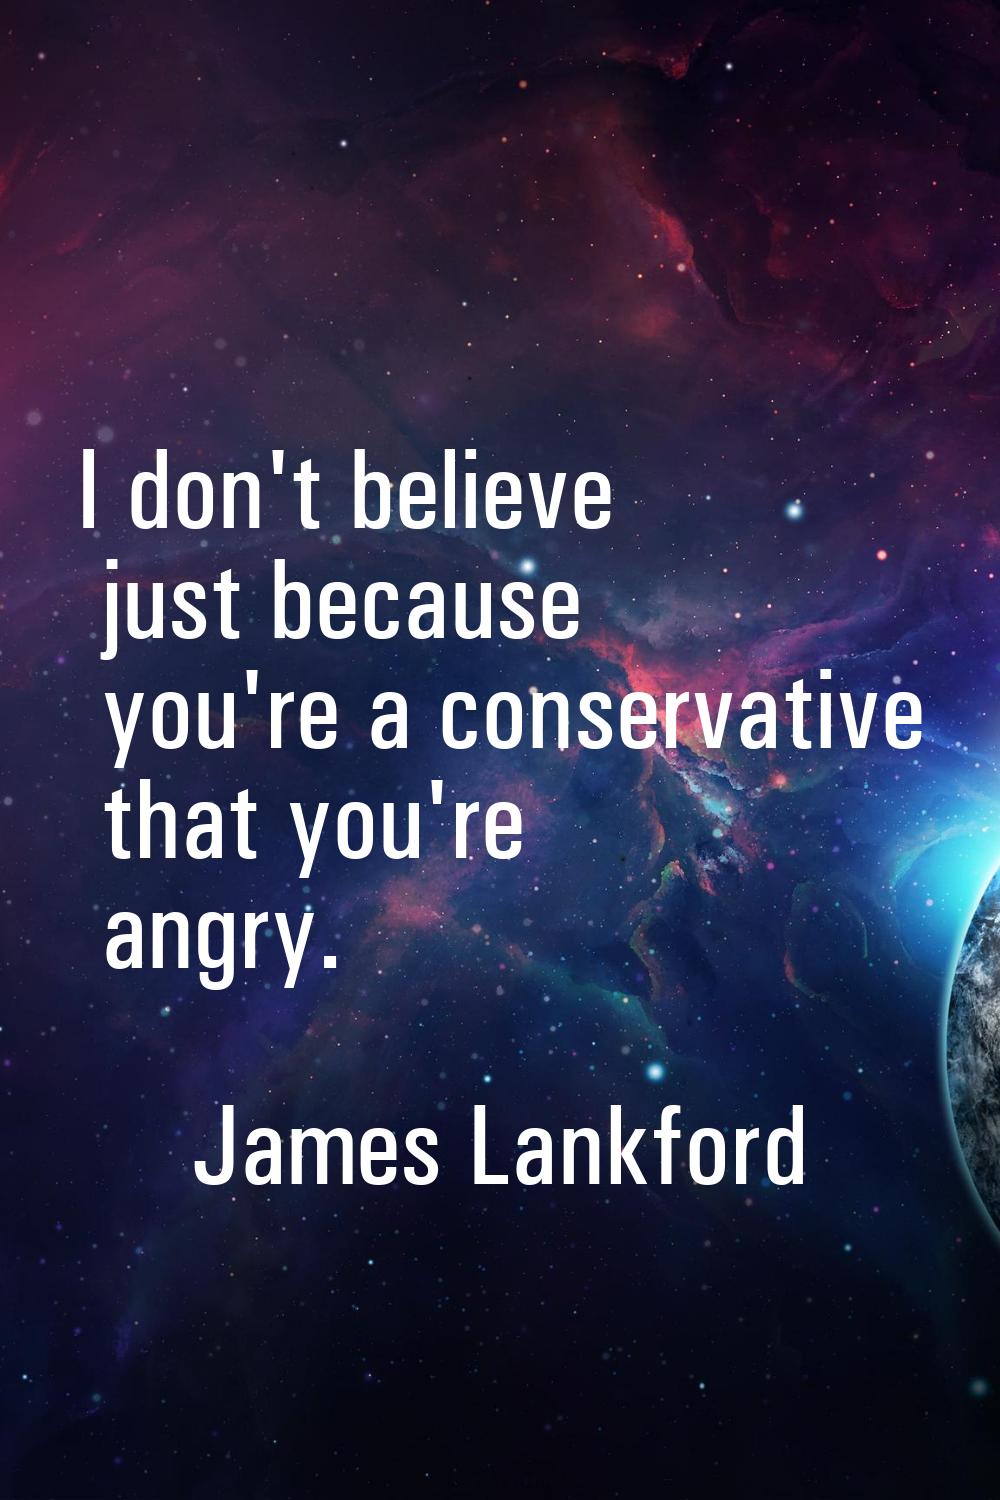 I don't believe just because you're a conservative that you're angry.